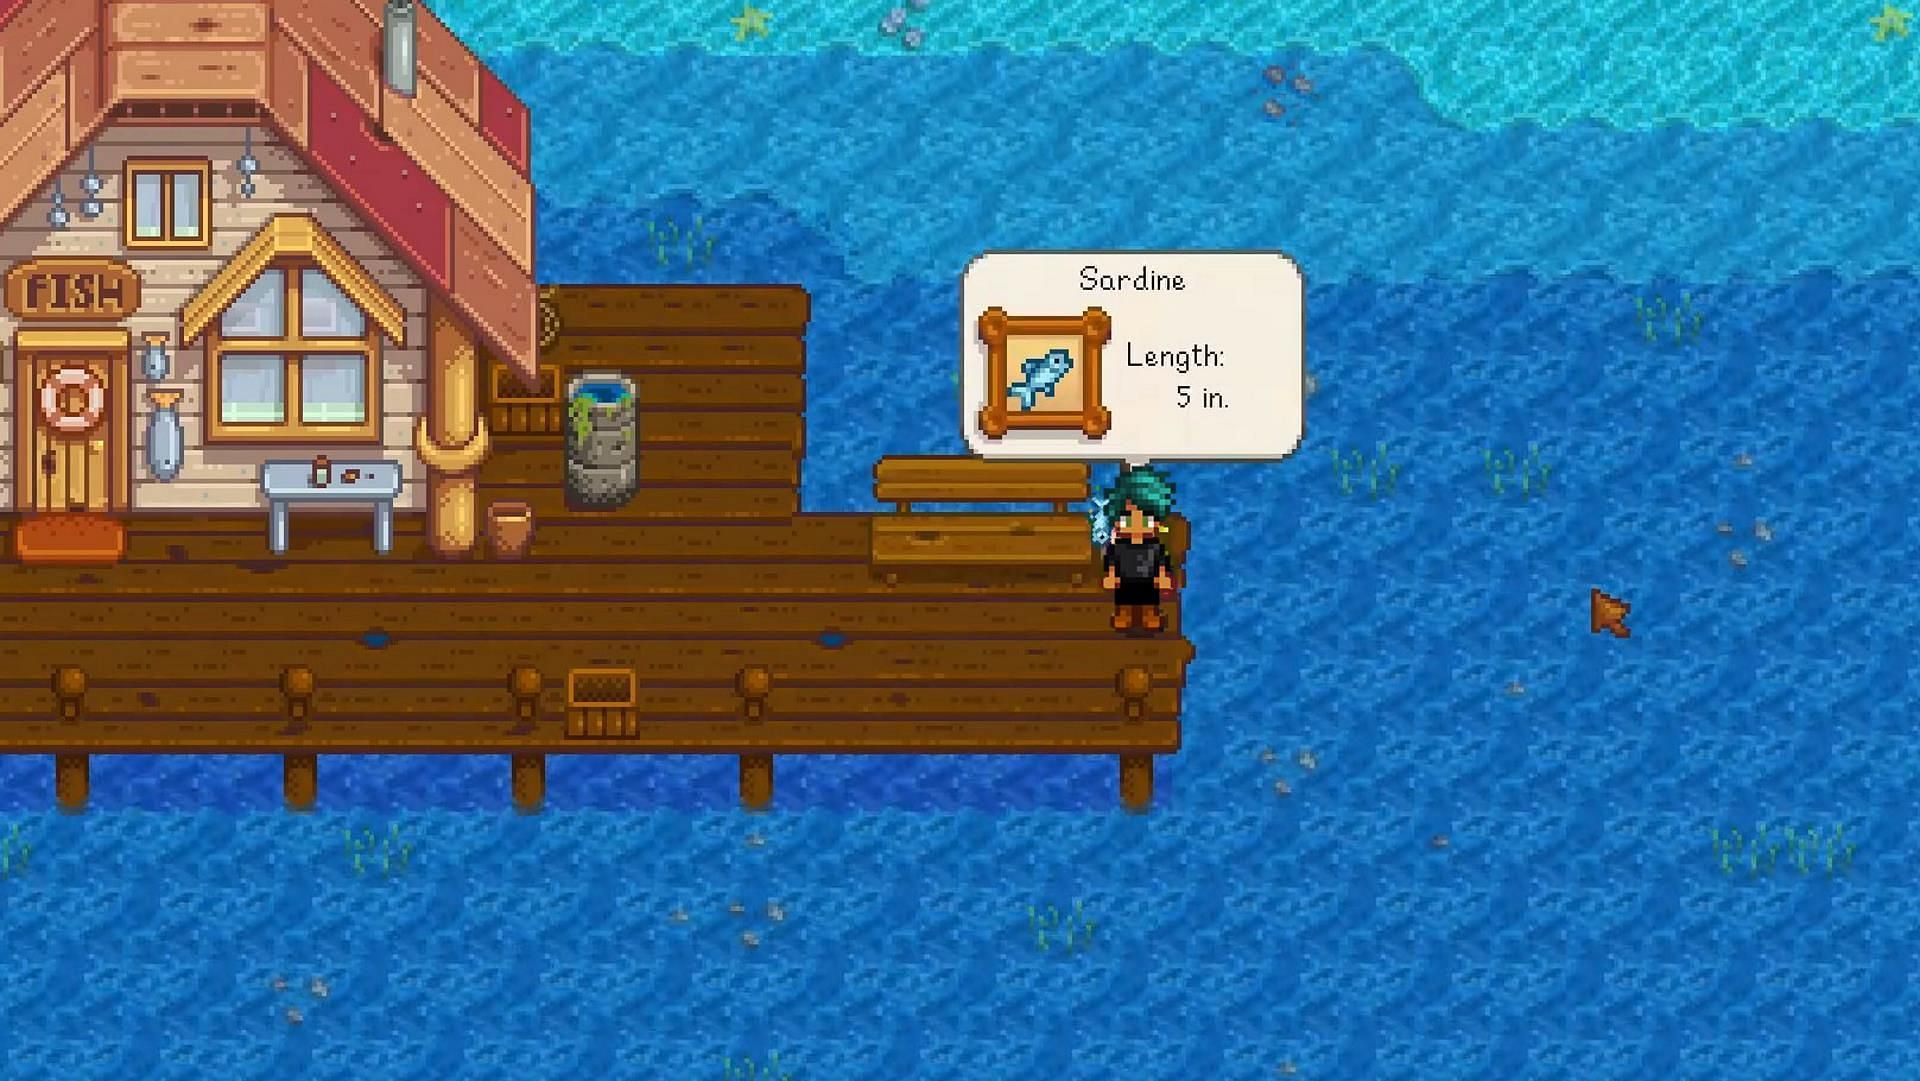 Make recipes using Sardine in Stardew Valley or sell them. (Image via ConcernedApe)